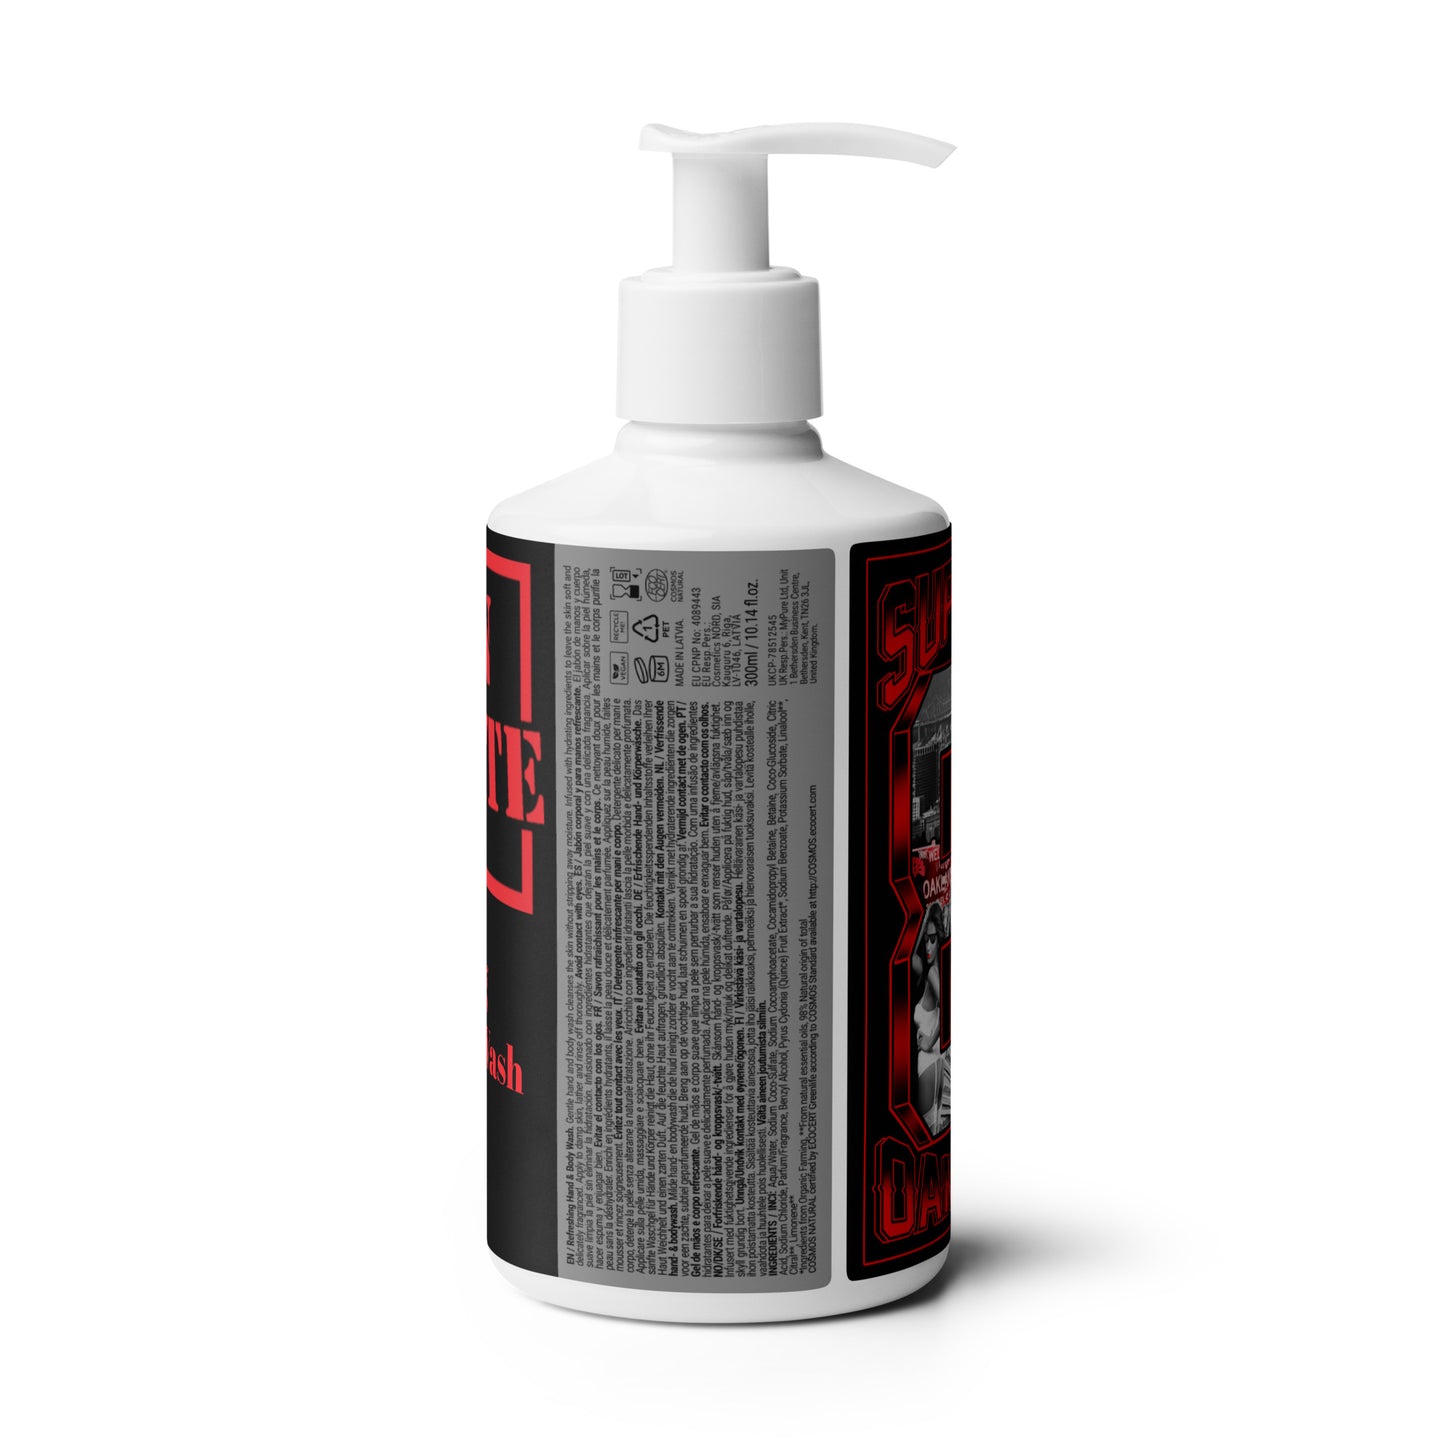 Support 81 Oakland -Refreshing hand & body wash